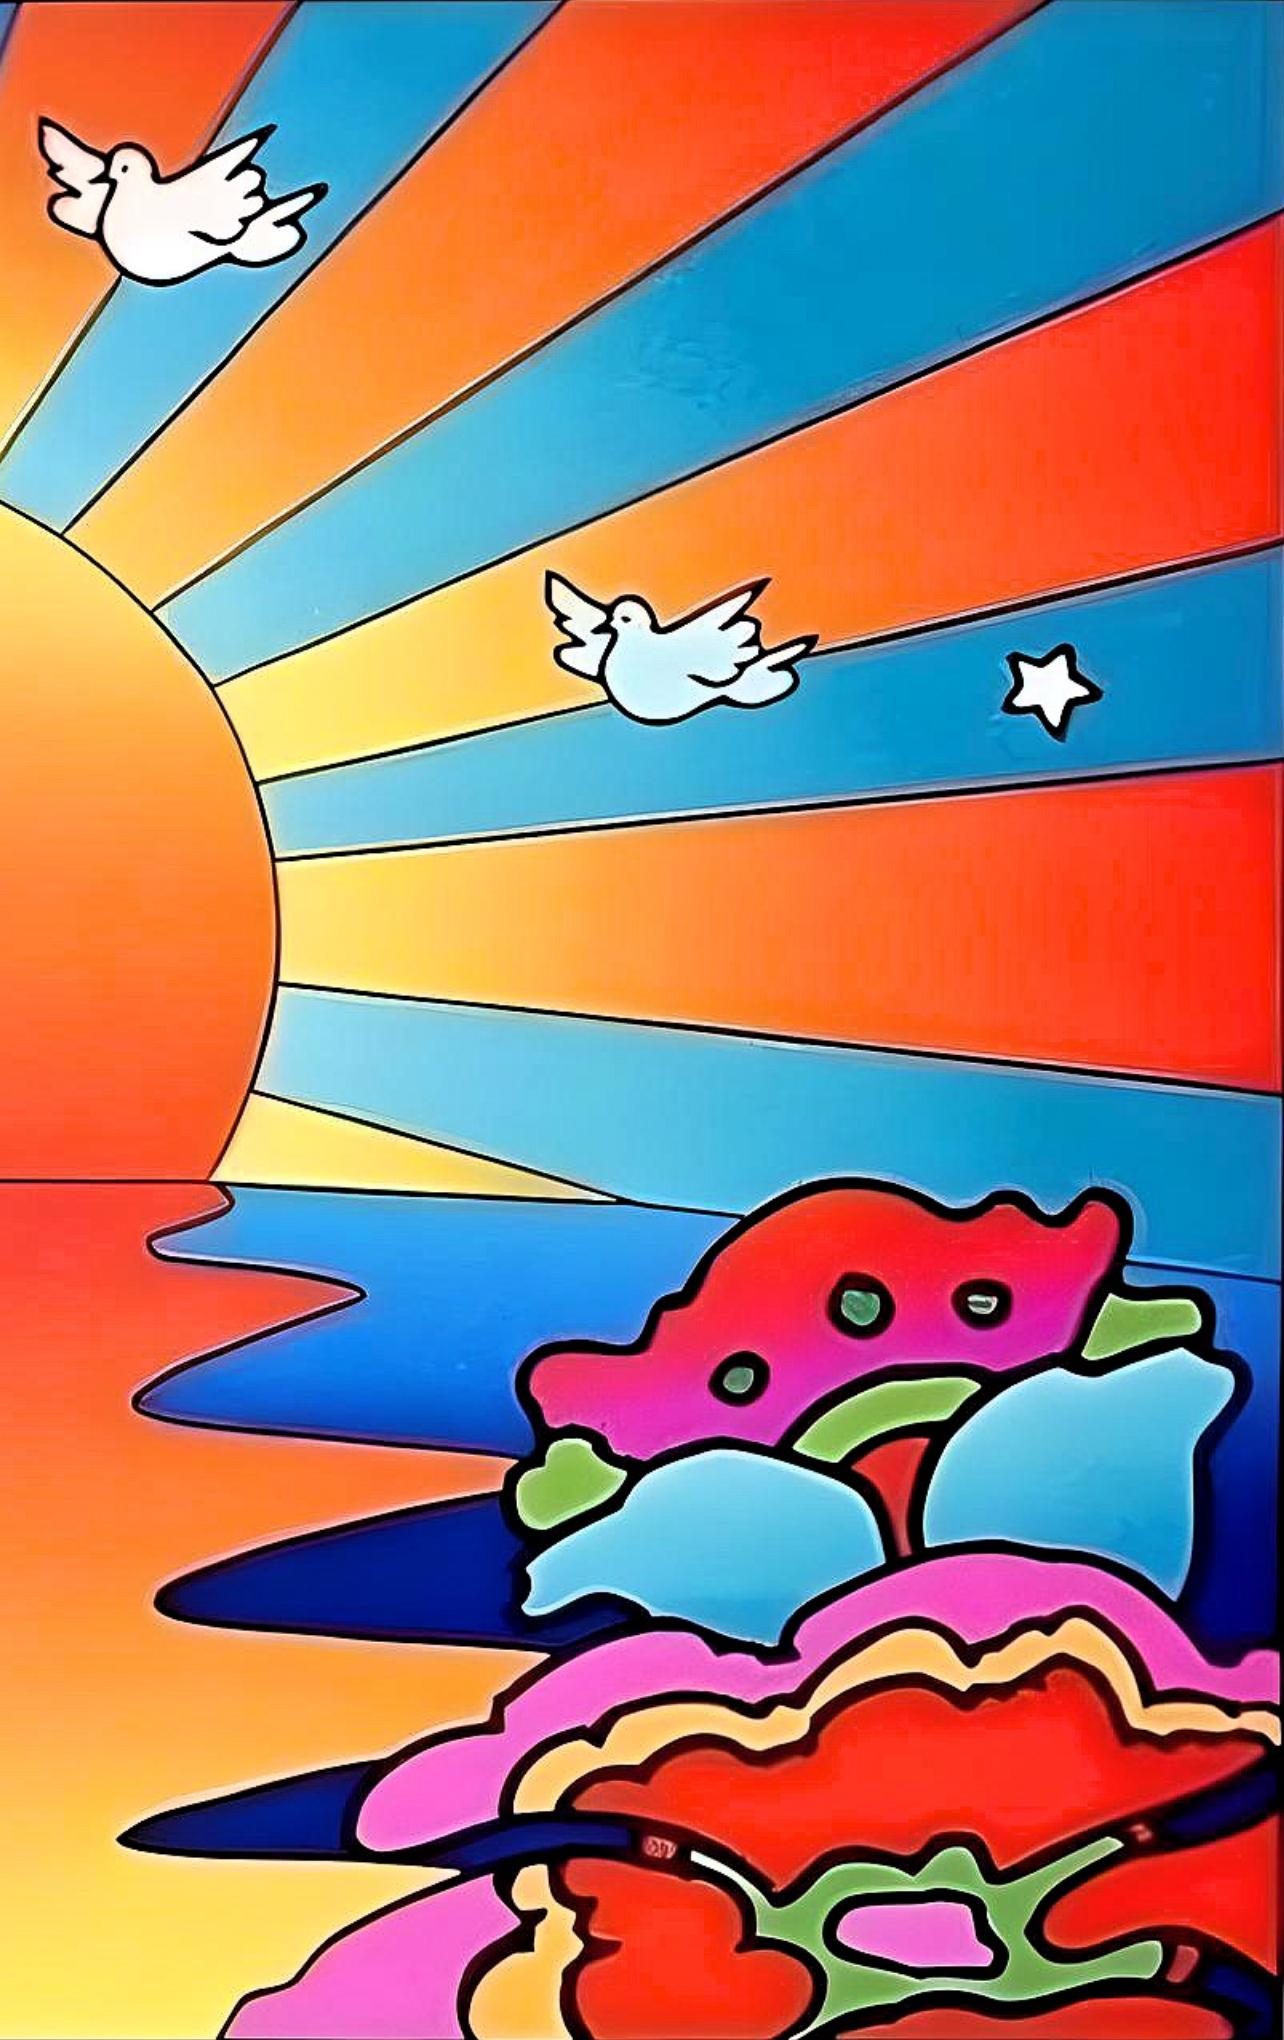 Artist: Peter Max (1937)
Title: Protect Our Children Ver. II
Year: 2002
Edition: 500/500, plus proofs
Medium: Lithograph on archival paper
Size: 13.81 x 17.12 inches
Condition: Excellent
Inscription: Signed and numbered by the artist.
Notes: